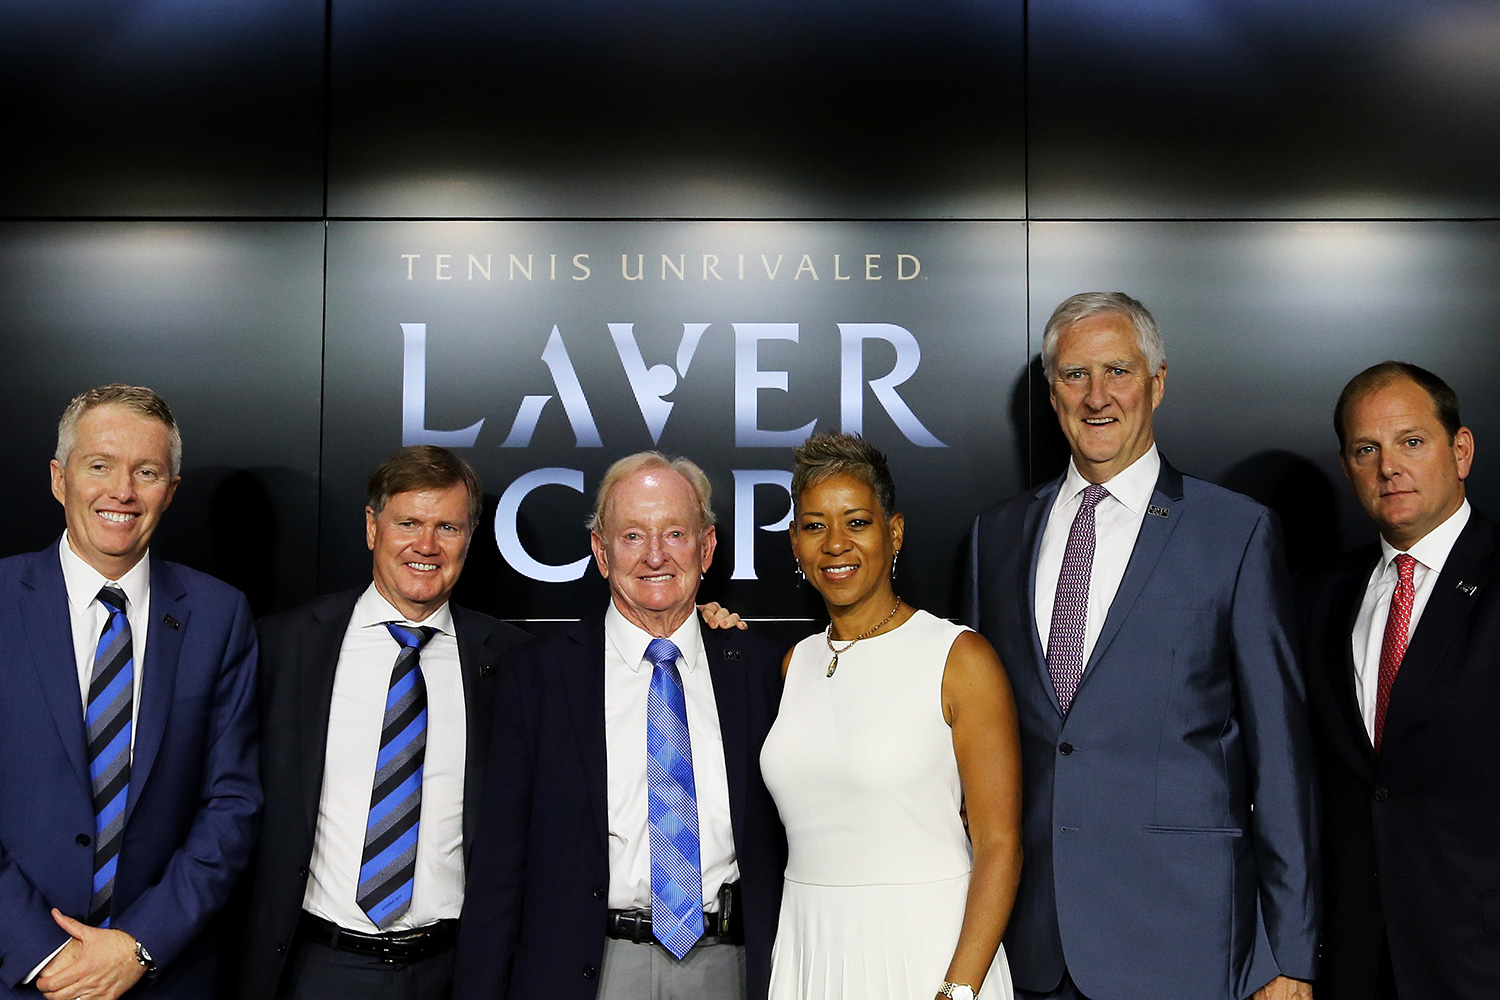 Laver Cup welcomes USTA partnership